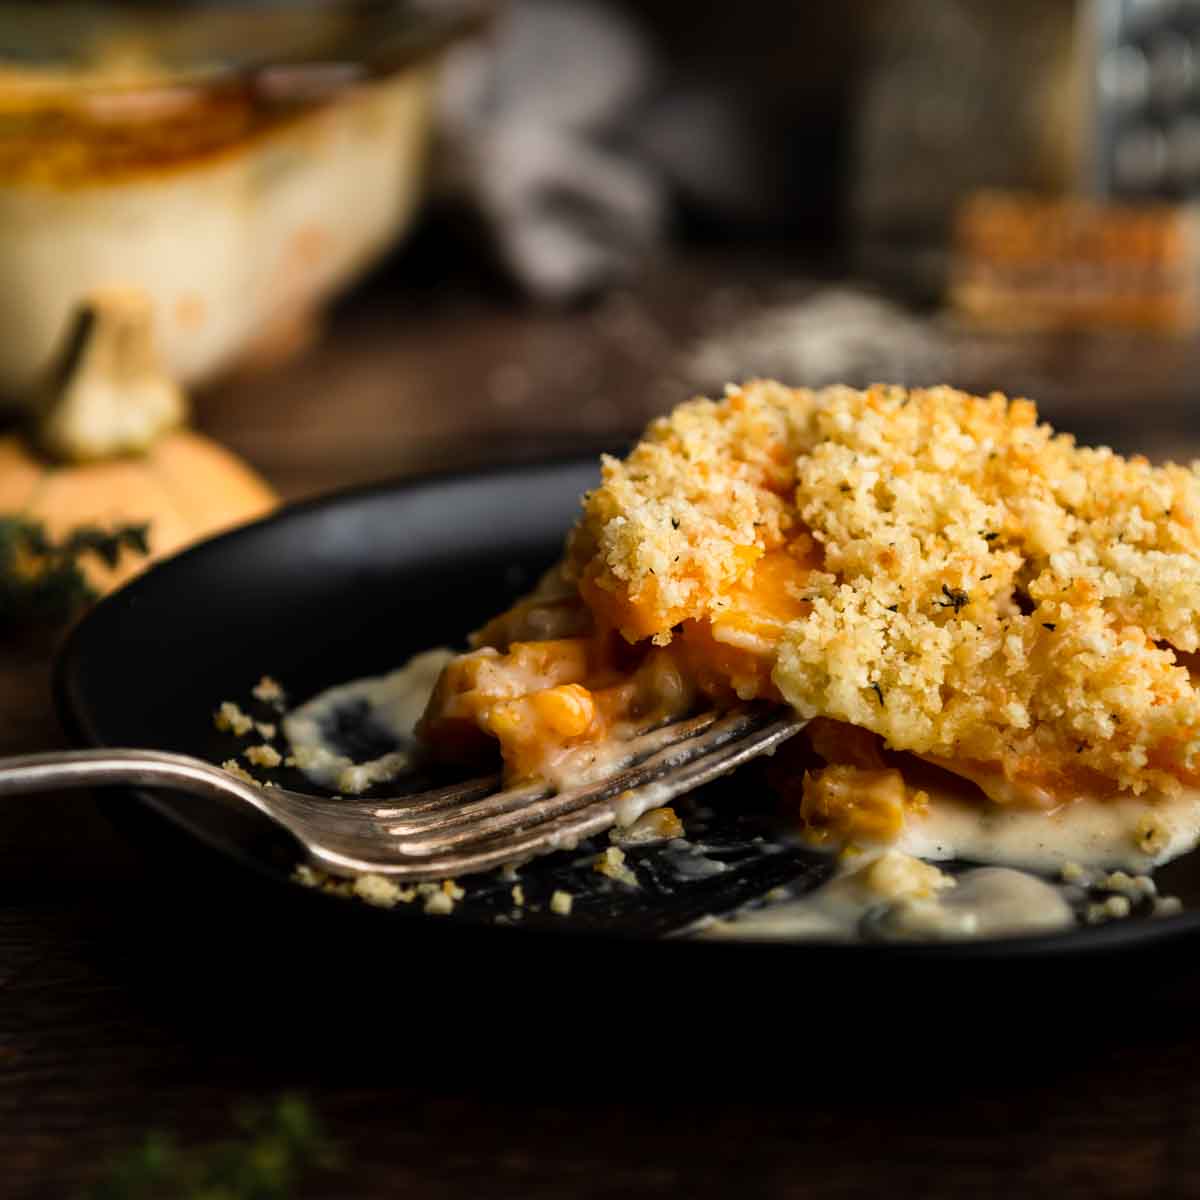 A fork on a plate with a big serving of cheesy butternut squash casserole